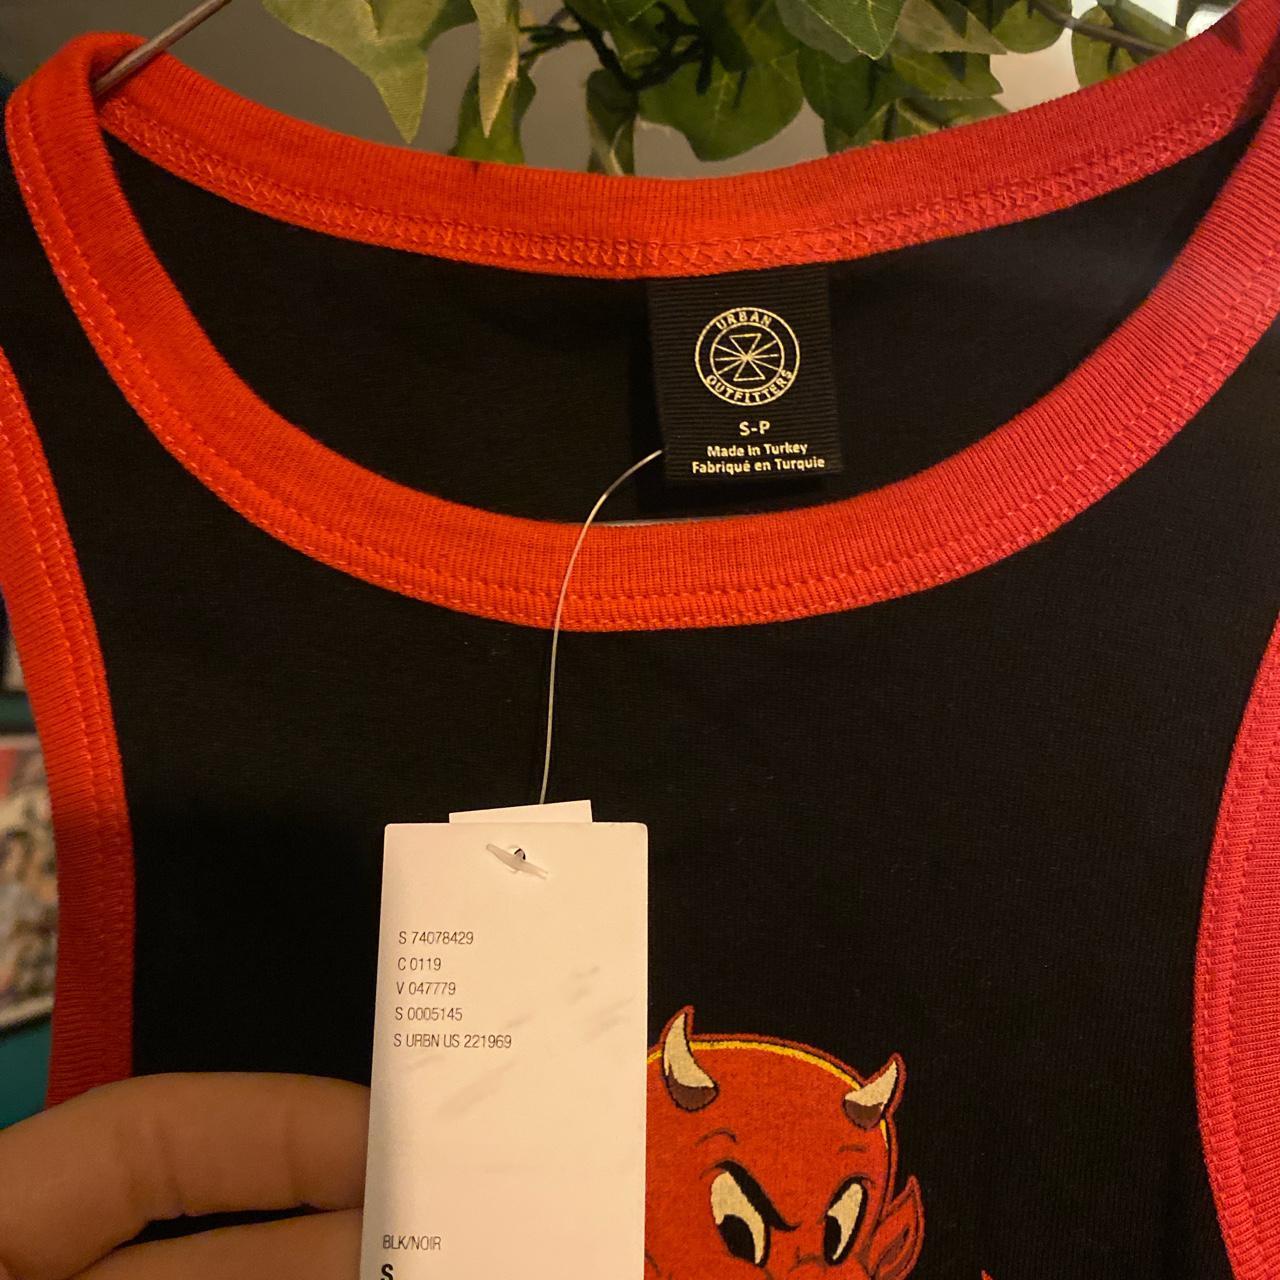 Product Image 2 - Bnwt urban outfitters devil tank